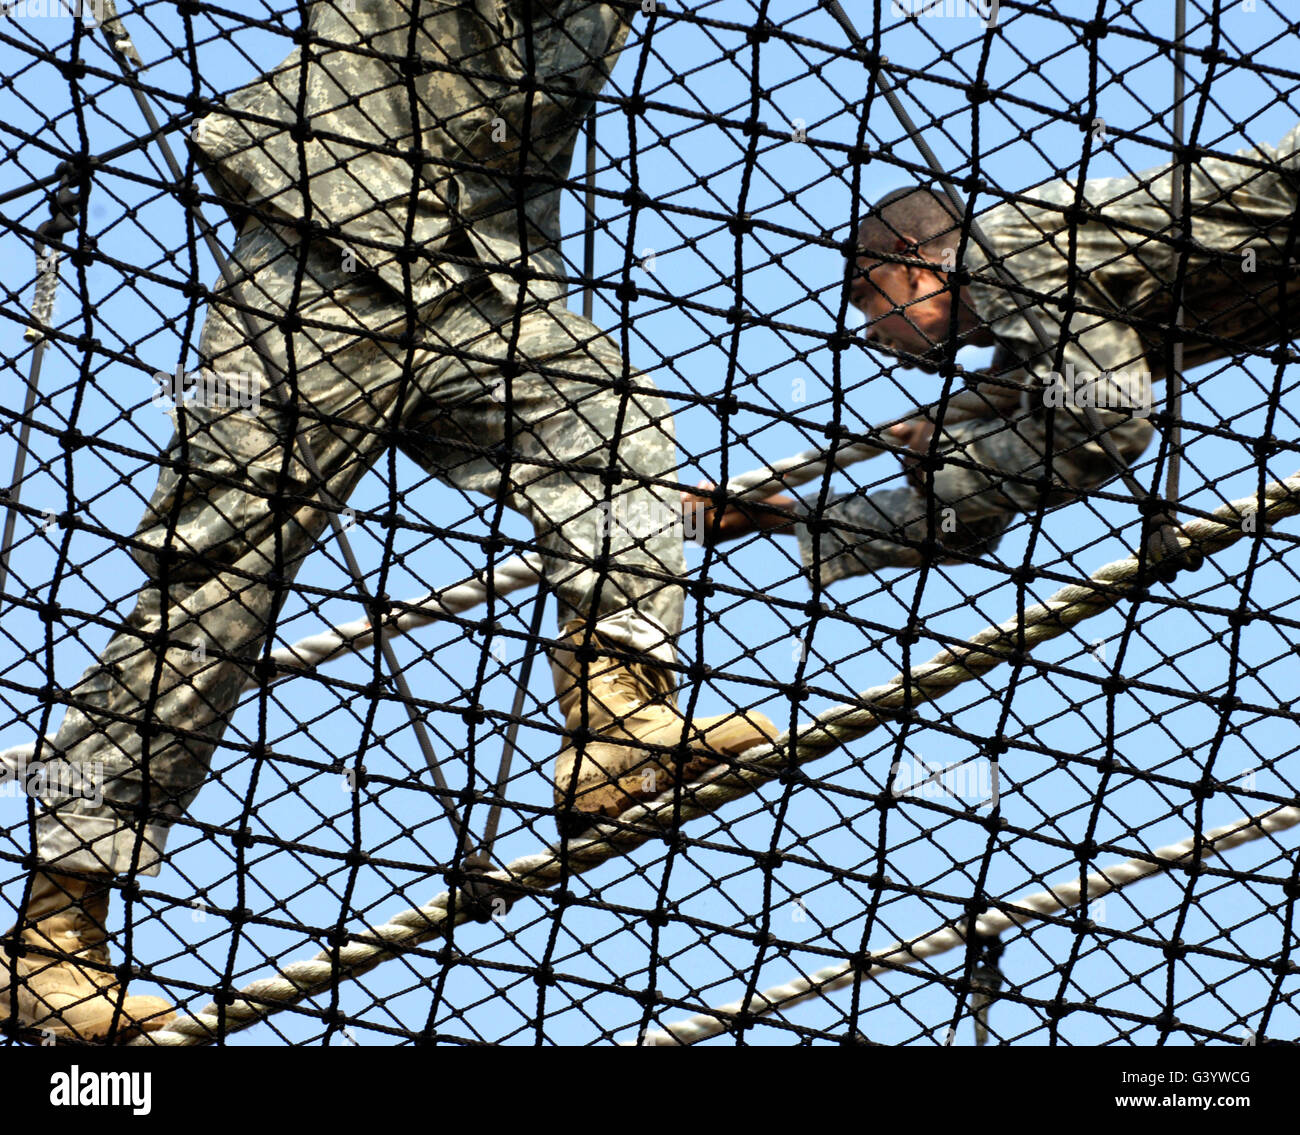 U.S. Army privates compete in the victory tower course during Army basic training. Stock Photo